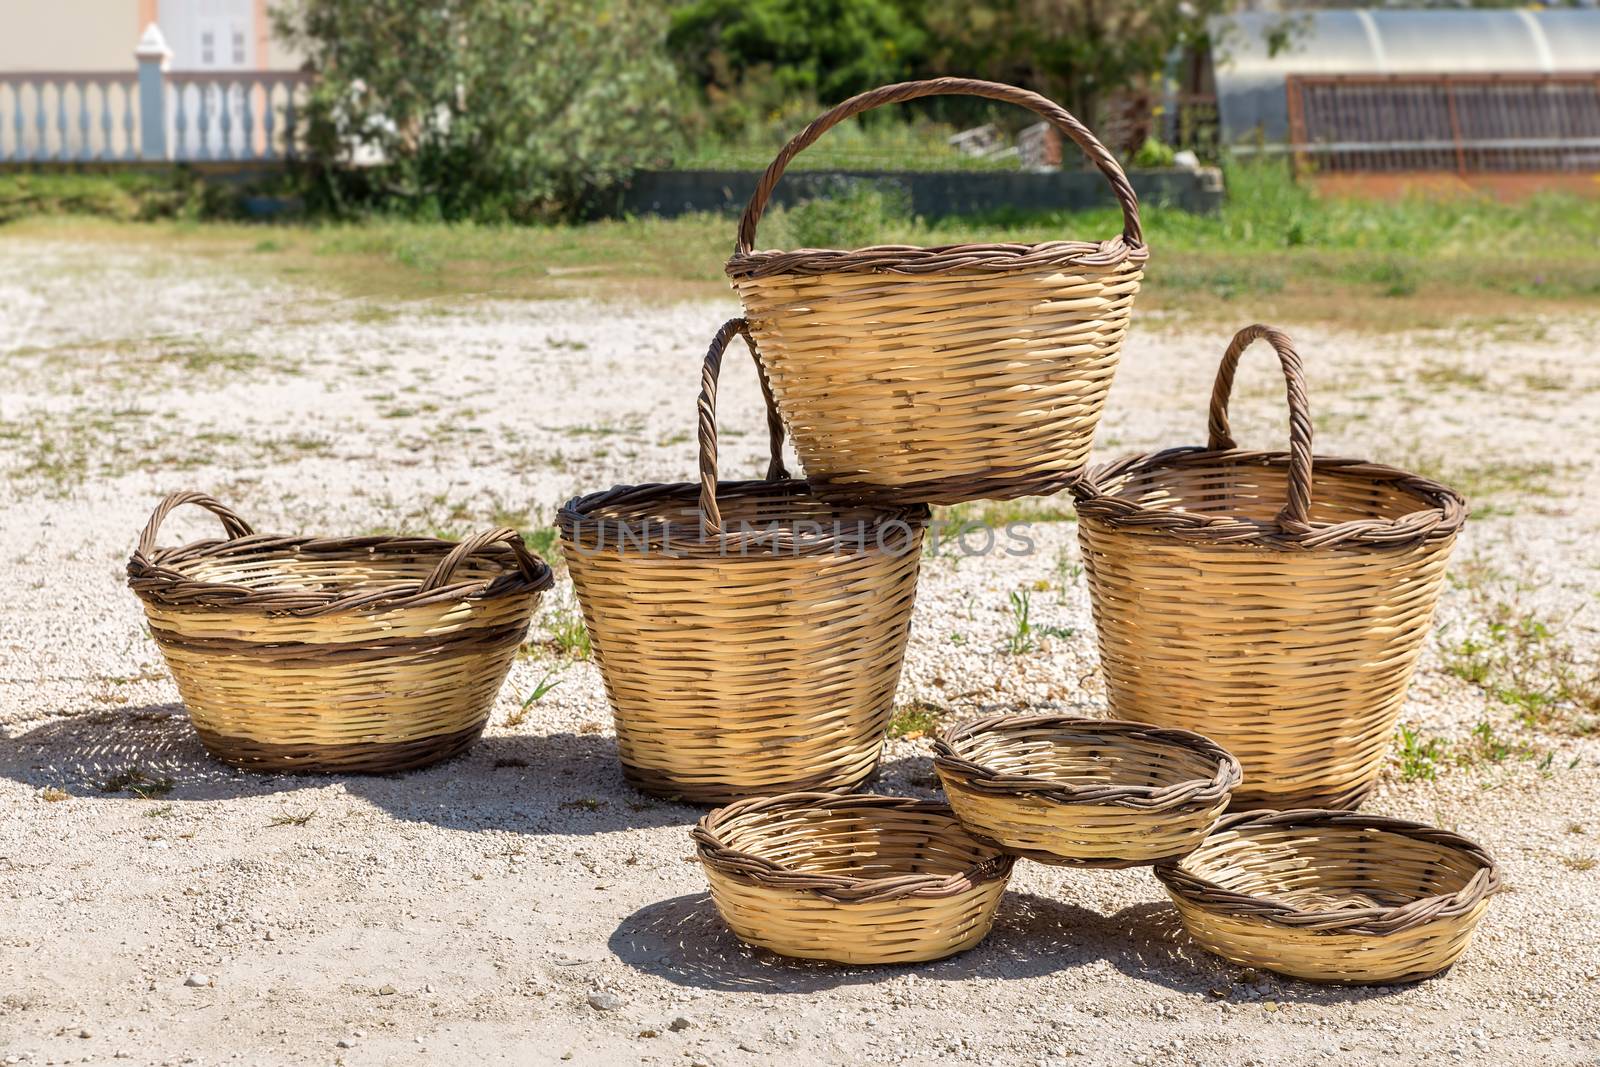 Reed baskets for sale as greek souvenirs by BenSchonewille